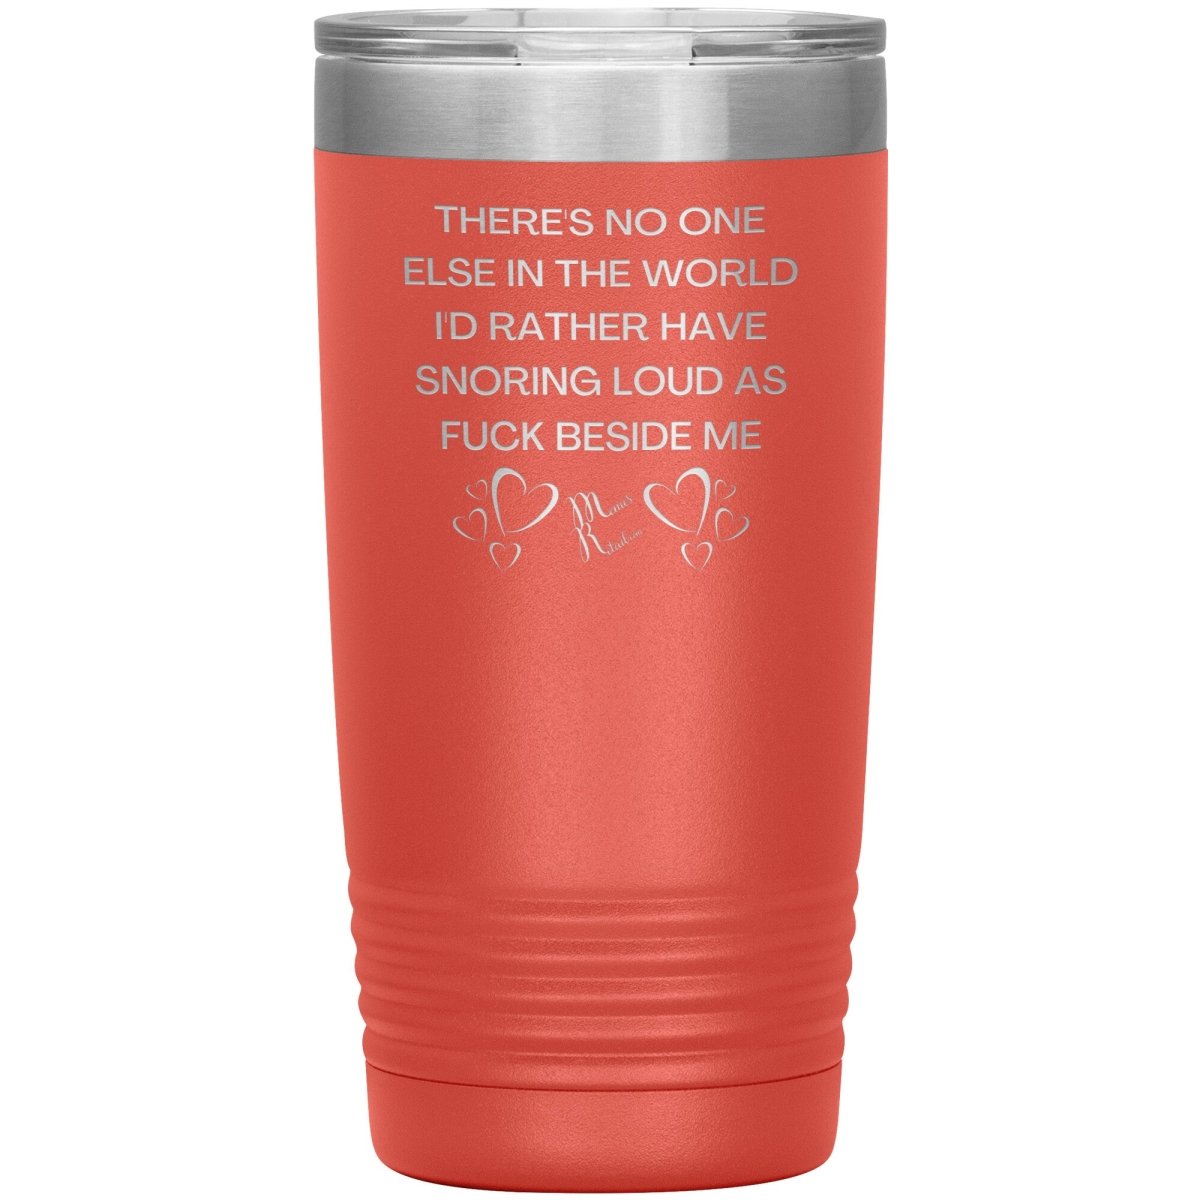 There's No One Else in the World I'd Rather Have Snoring Loud, 20oz Insulated Tumbler / Coral - MemesRetail.com